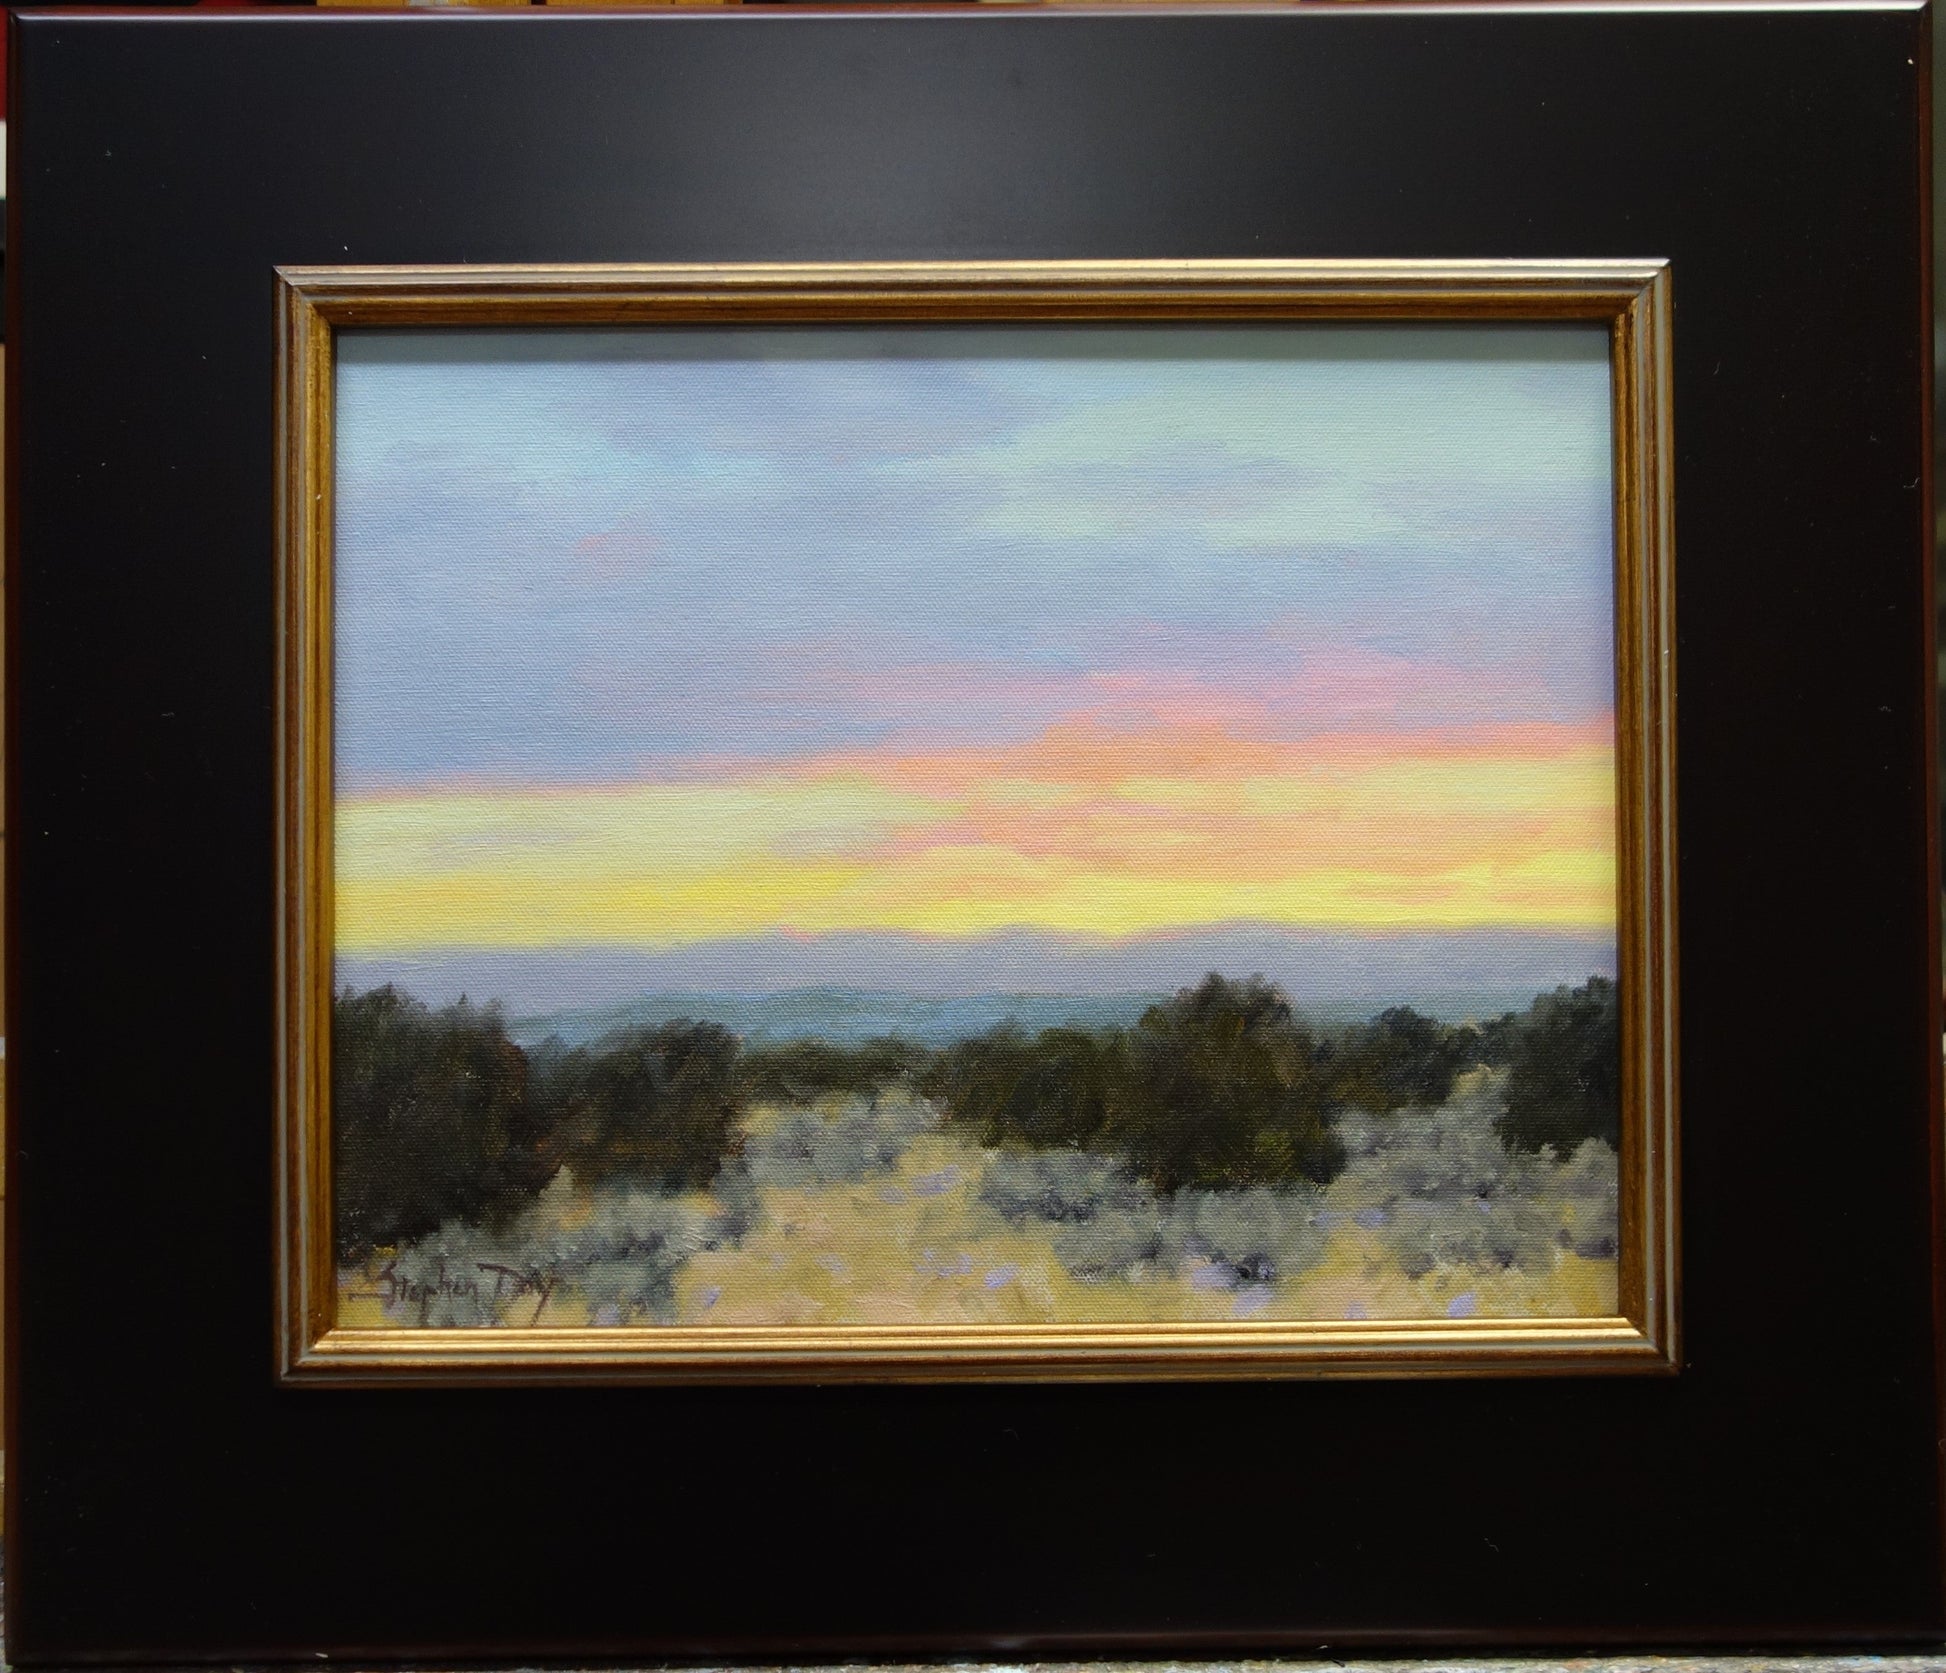 A Moment Of Color-Painting-Stephen Day-Sorrel Sky Gallery